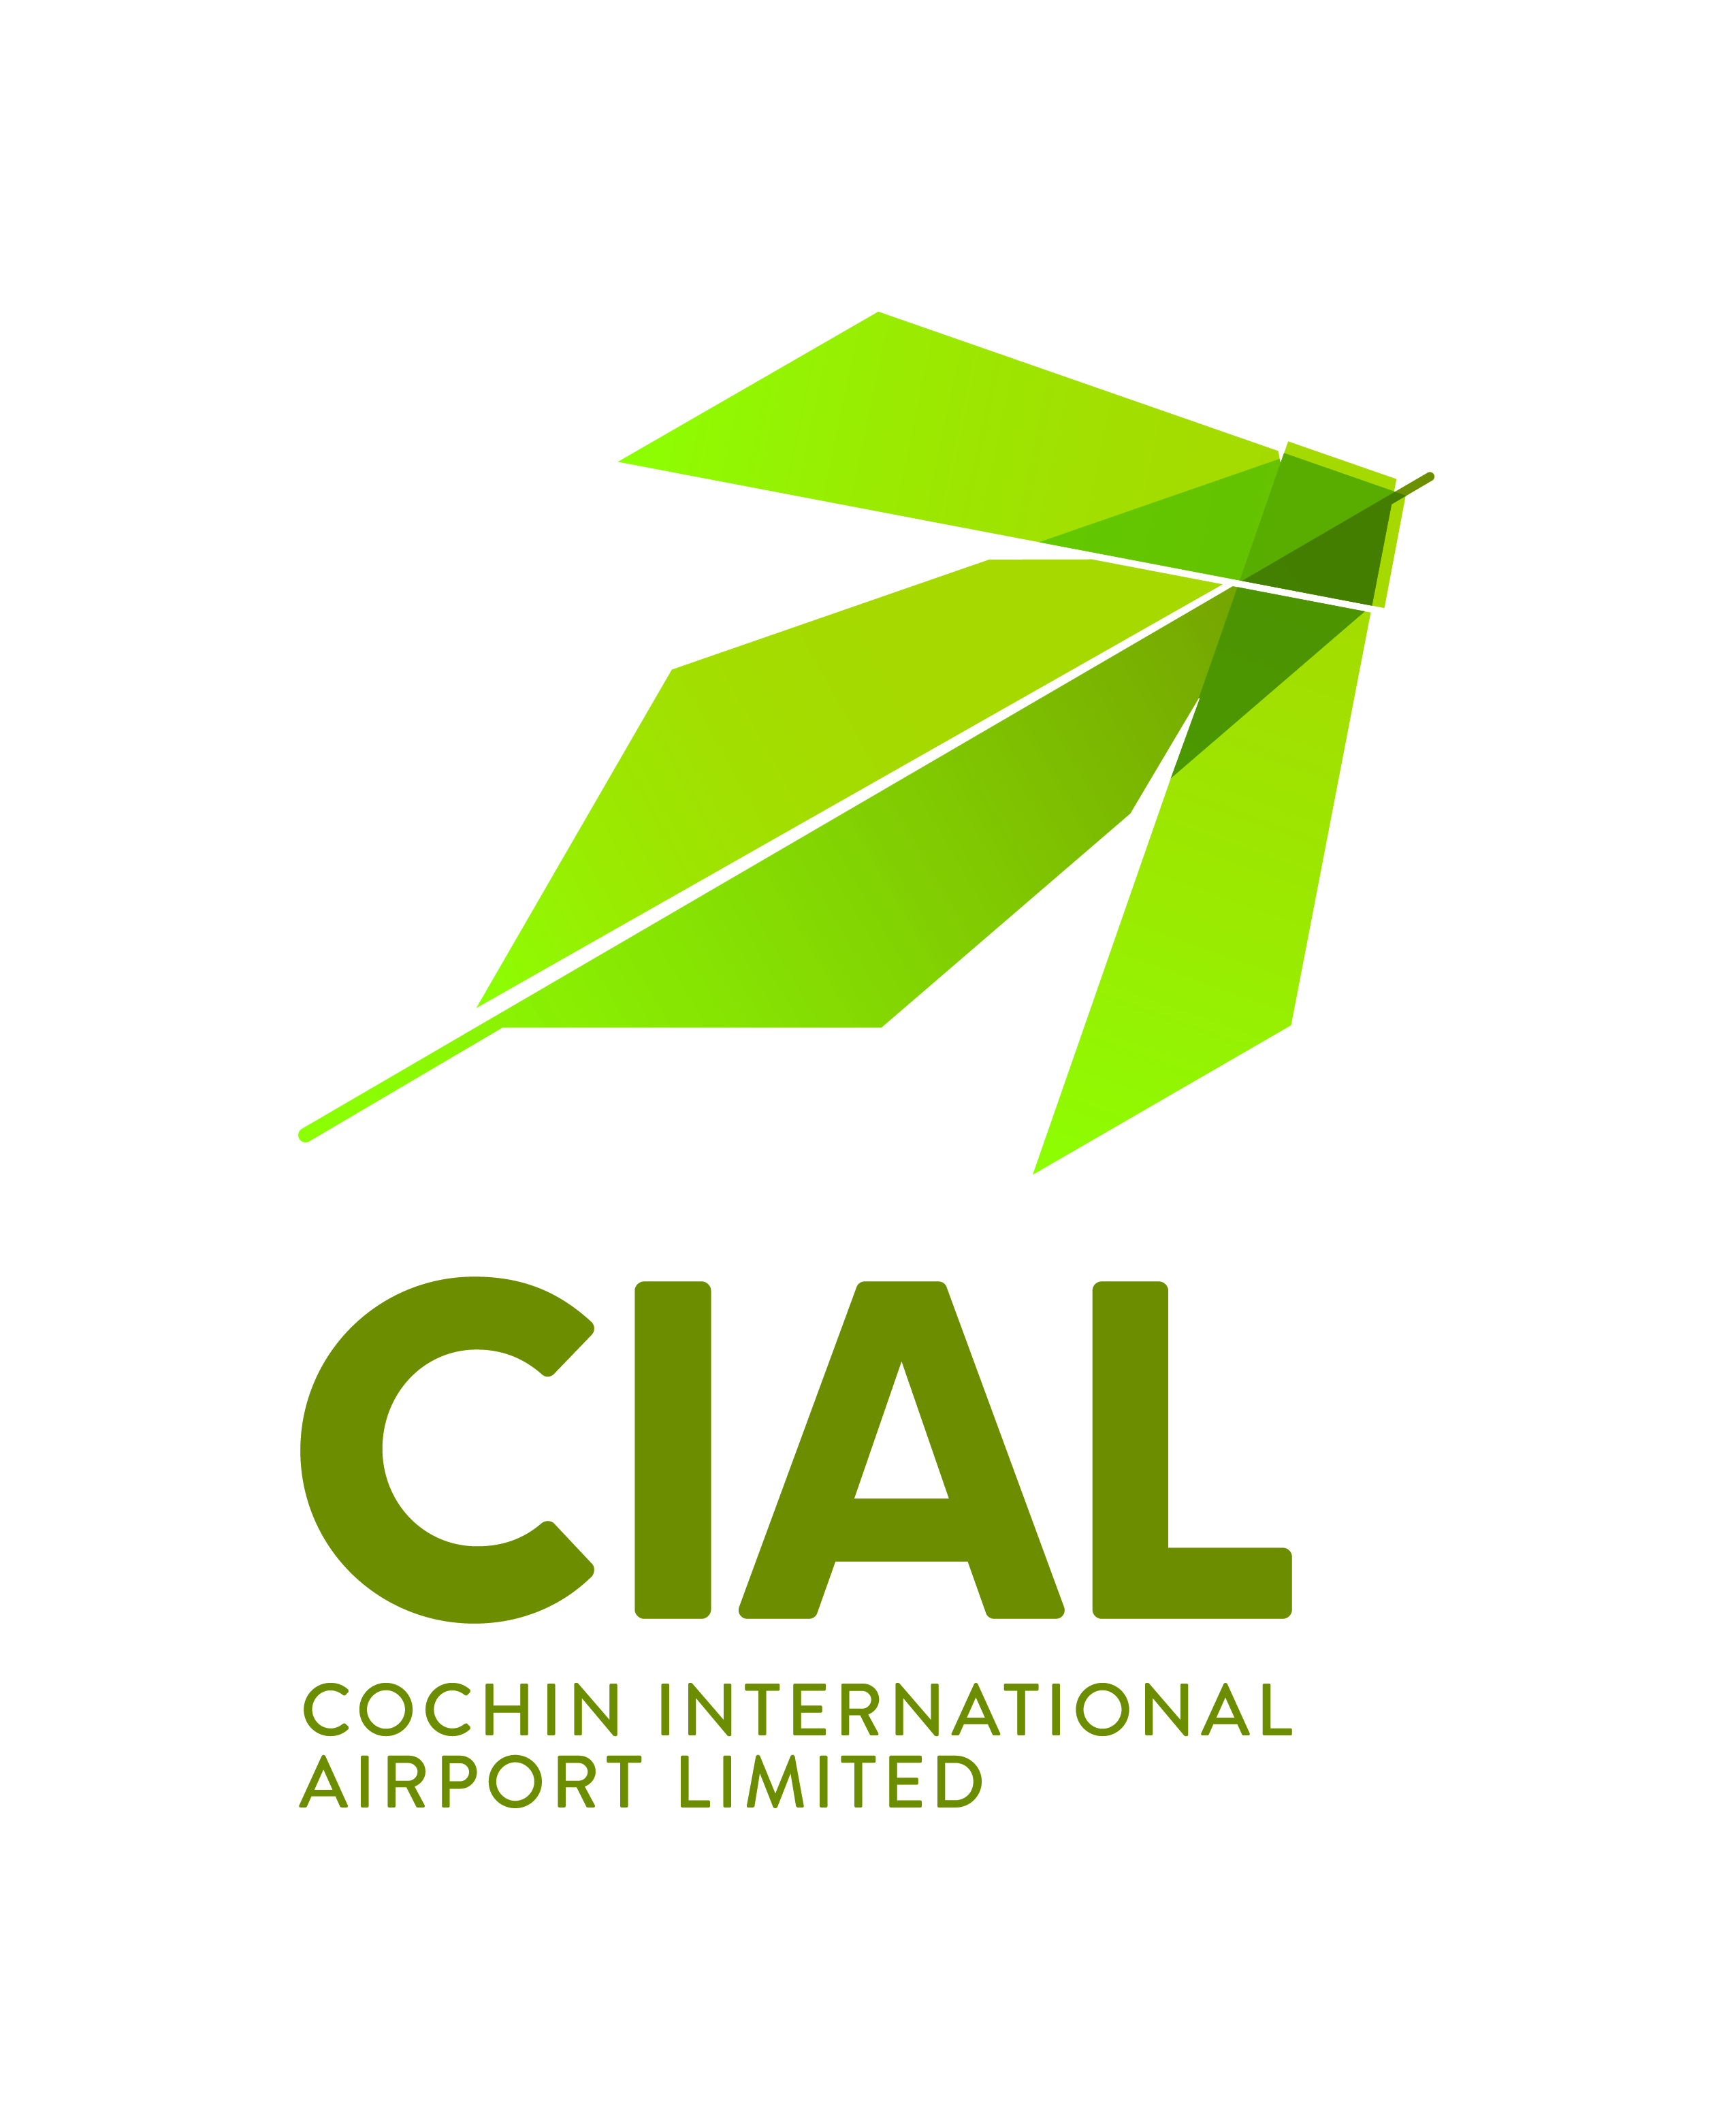 CIAL unveils new logo and brand identity